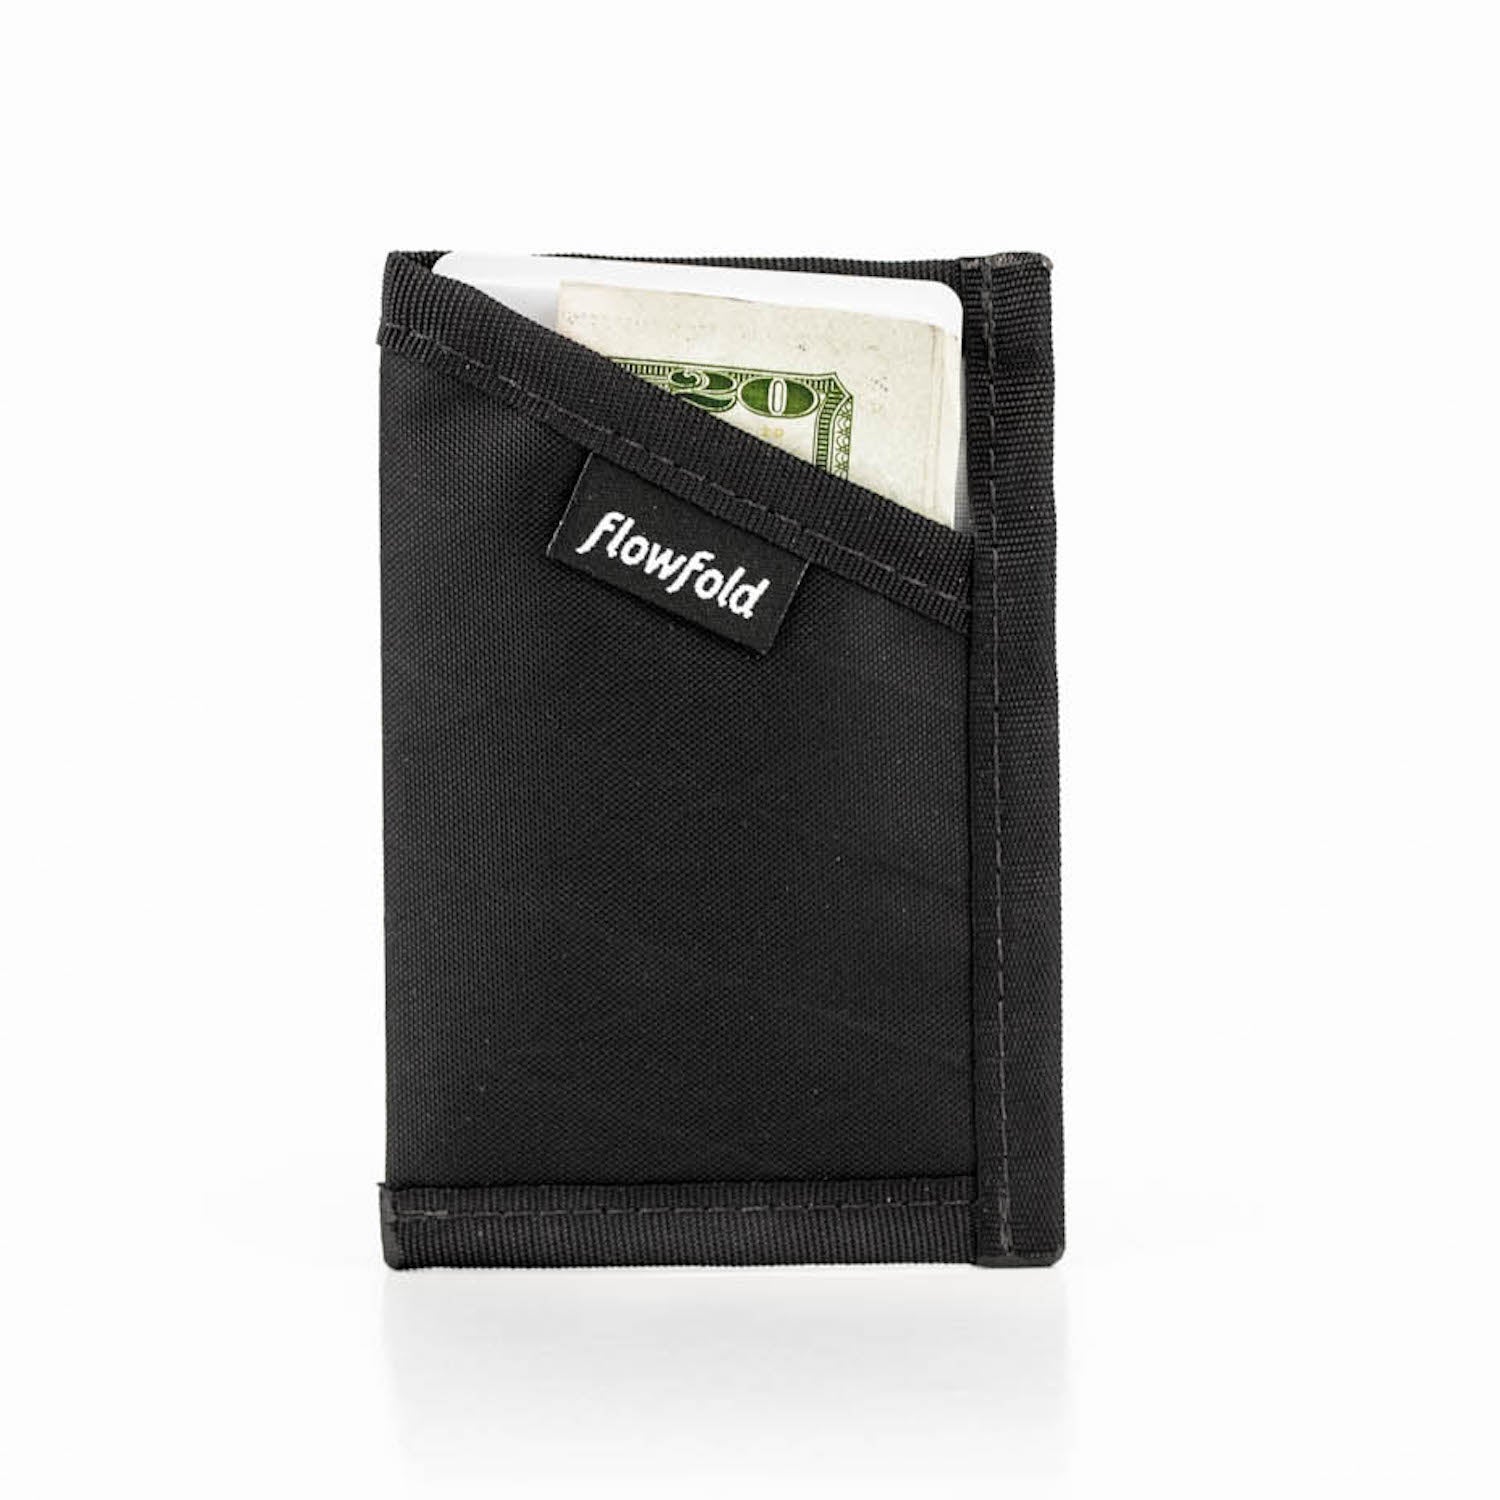 The Best RFID-Blocking Wallets in 2023, According to Gear Experts